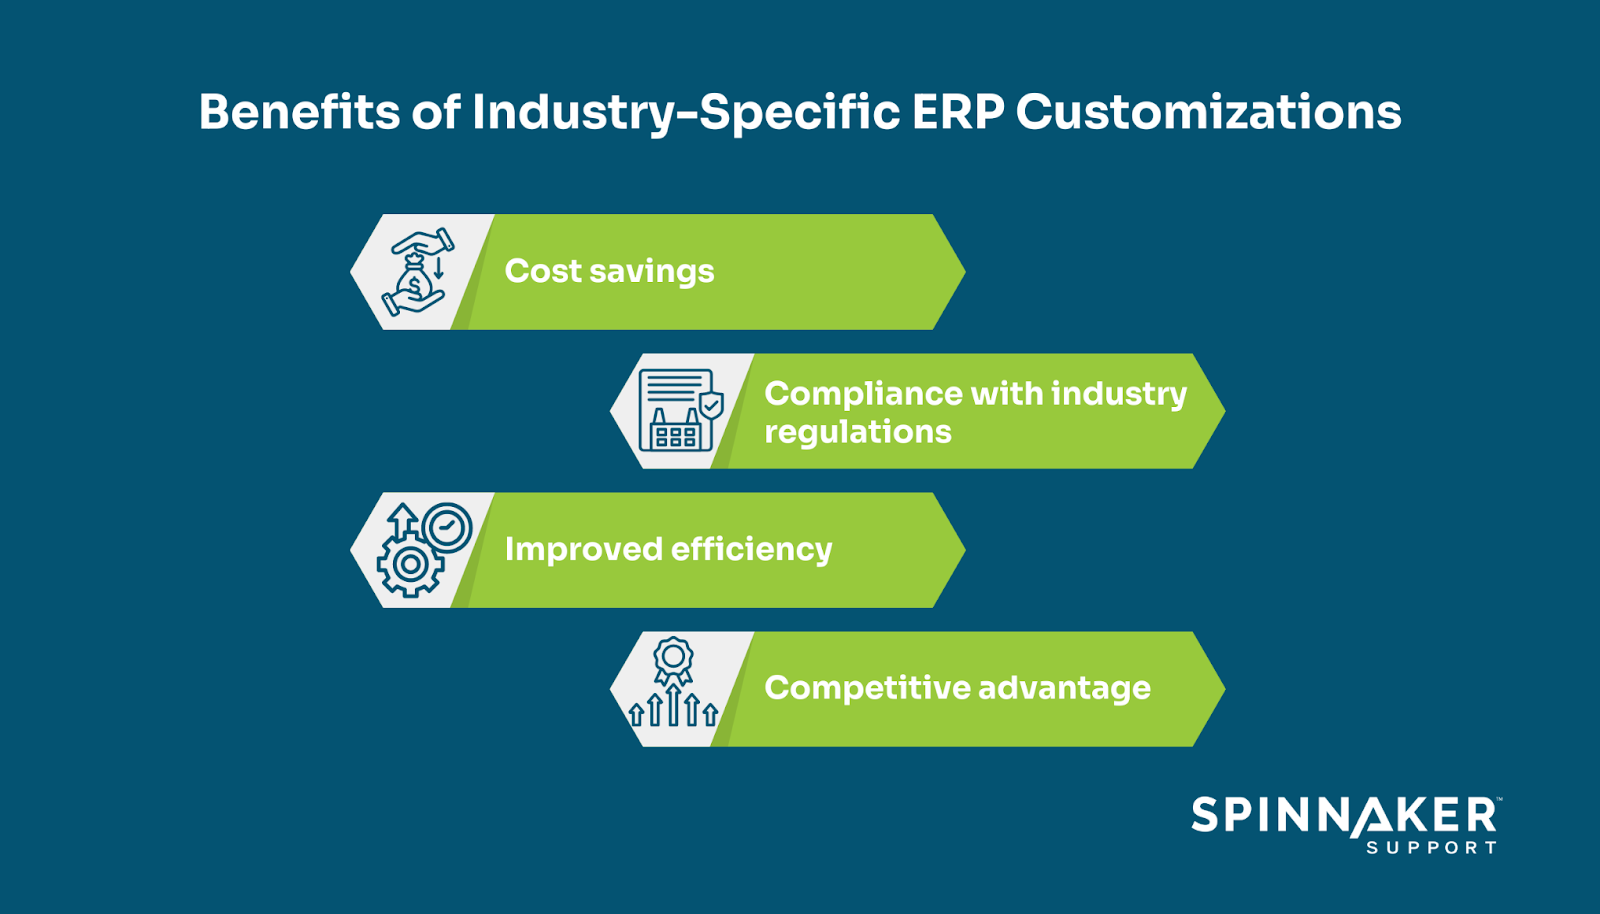 Benefits of industry-specific customization features in modern ERP